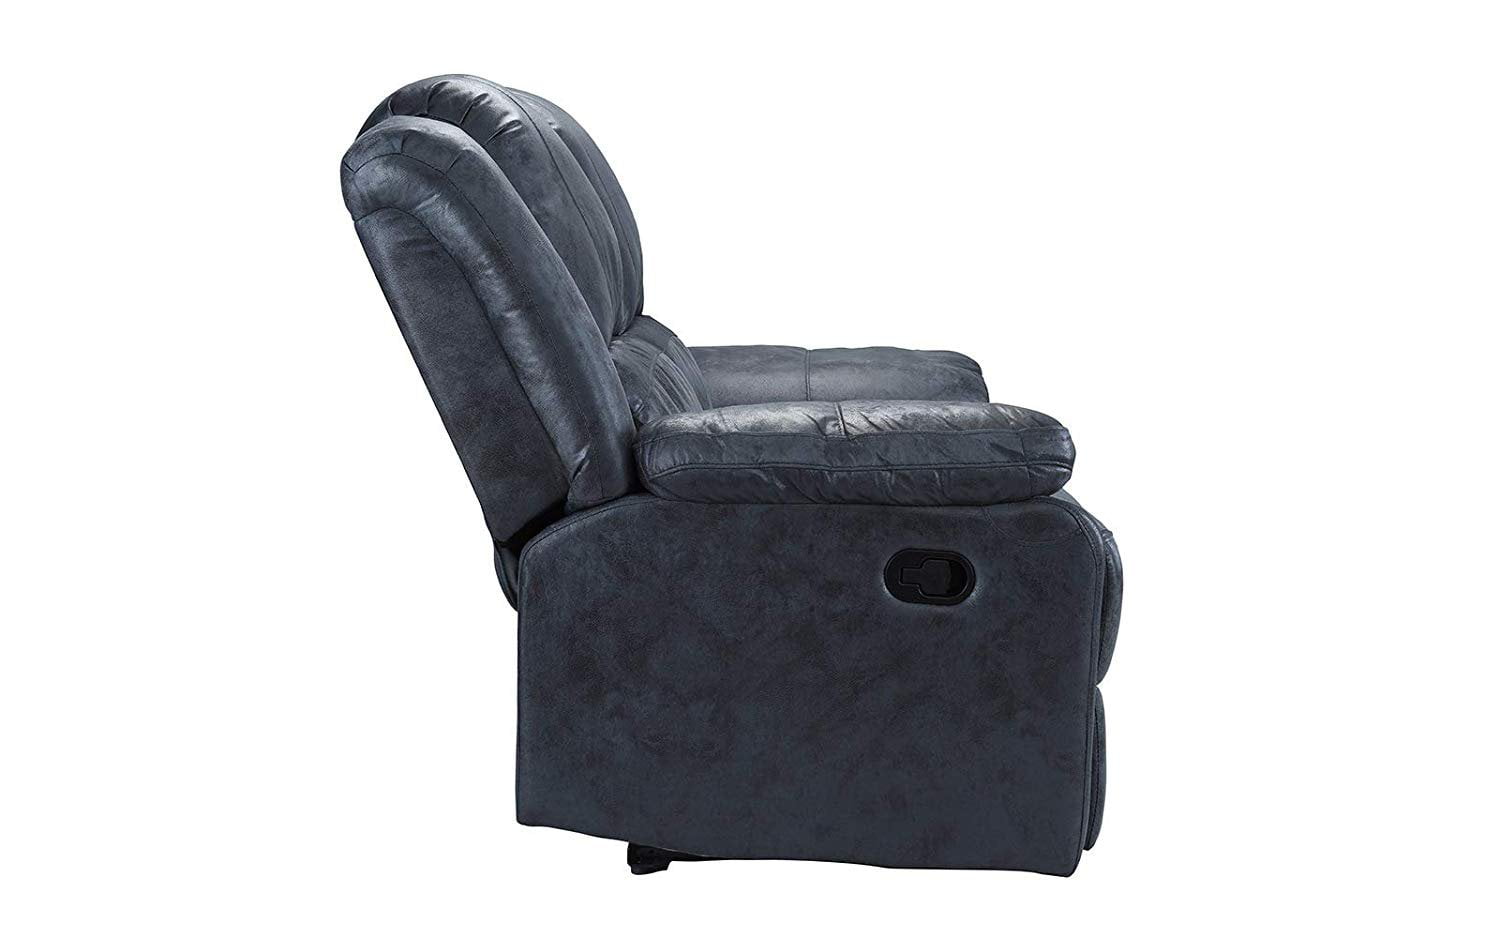 Ivory Divano Roma Furniture Oversize Ultra Comfortable Air Leather Fabric Rocker and Swivel Recliner Living Room Chair